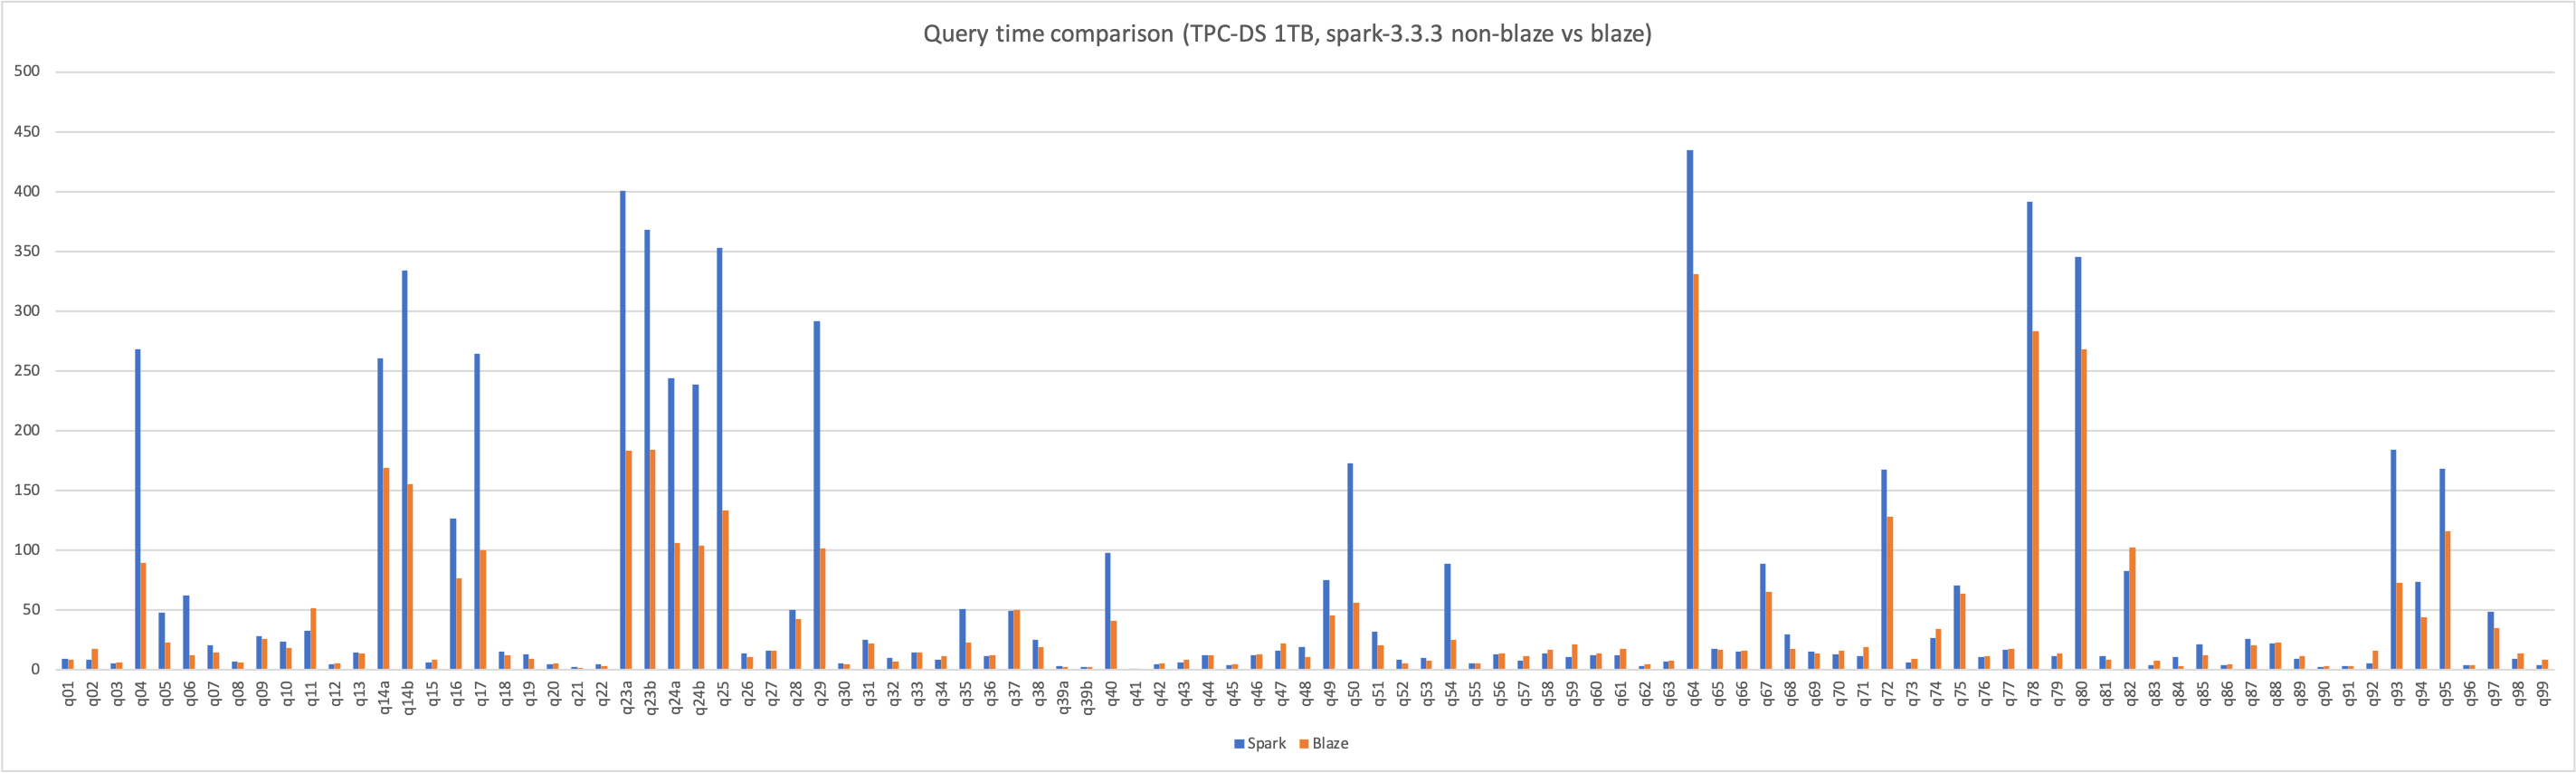 20230925-query-time